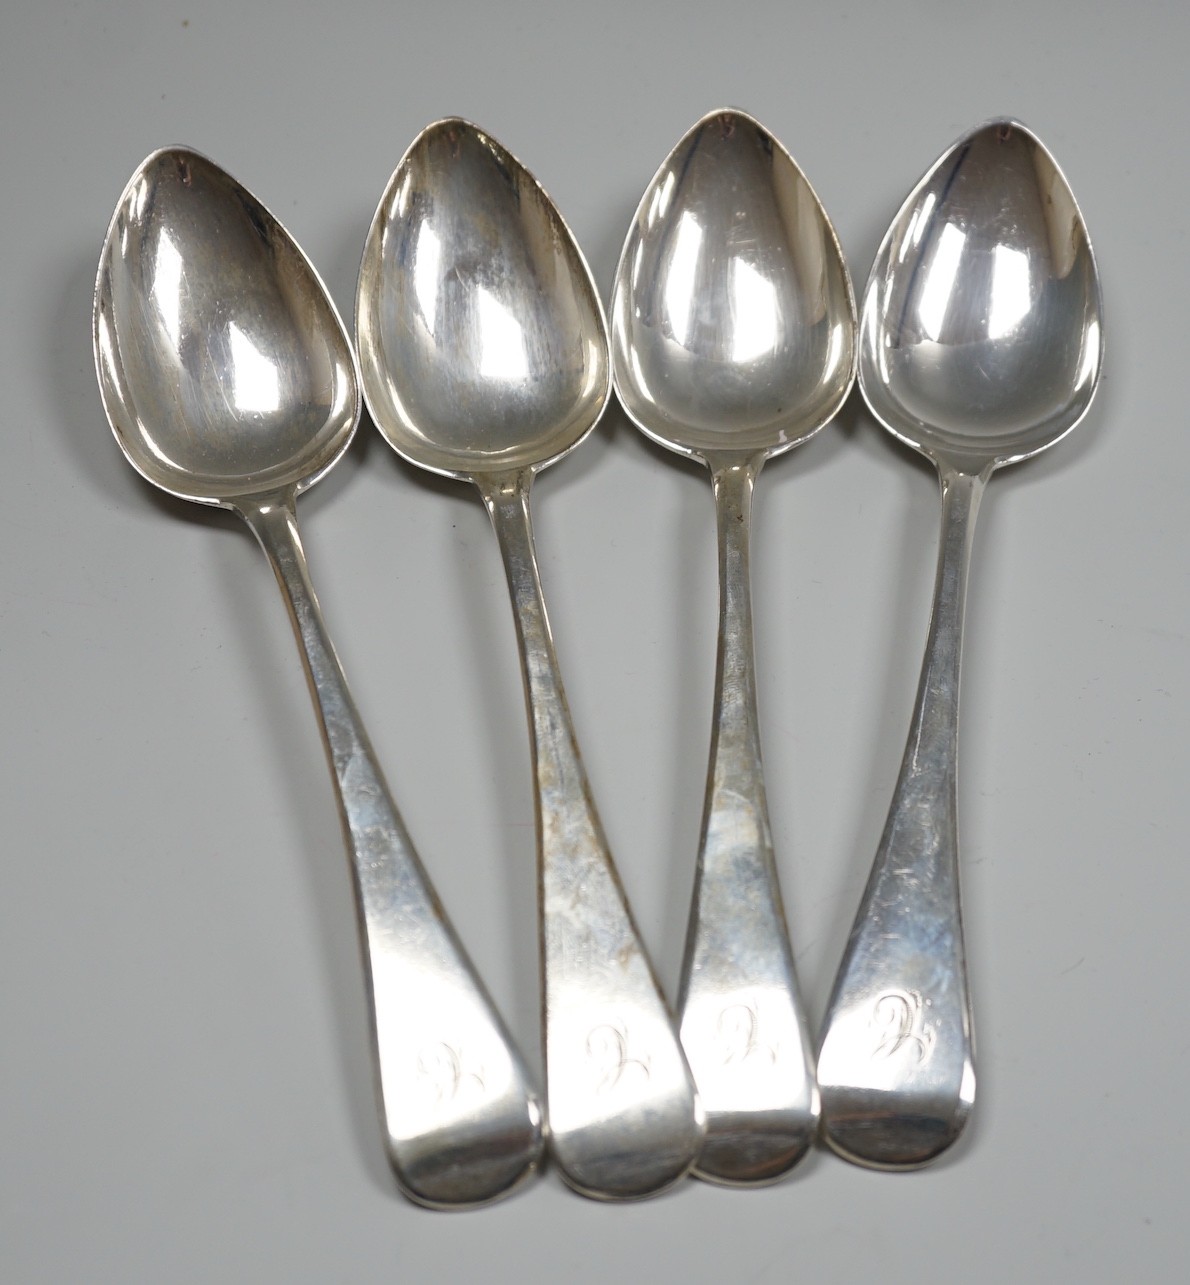 A set of four George III silver Old English pattern table spoons, Sarah & John William Blake, London, 1814, 22.9cm, 10.9oz.                                                                                                 